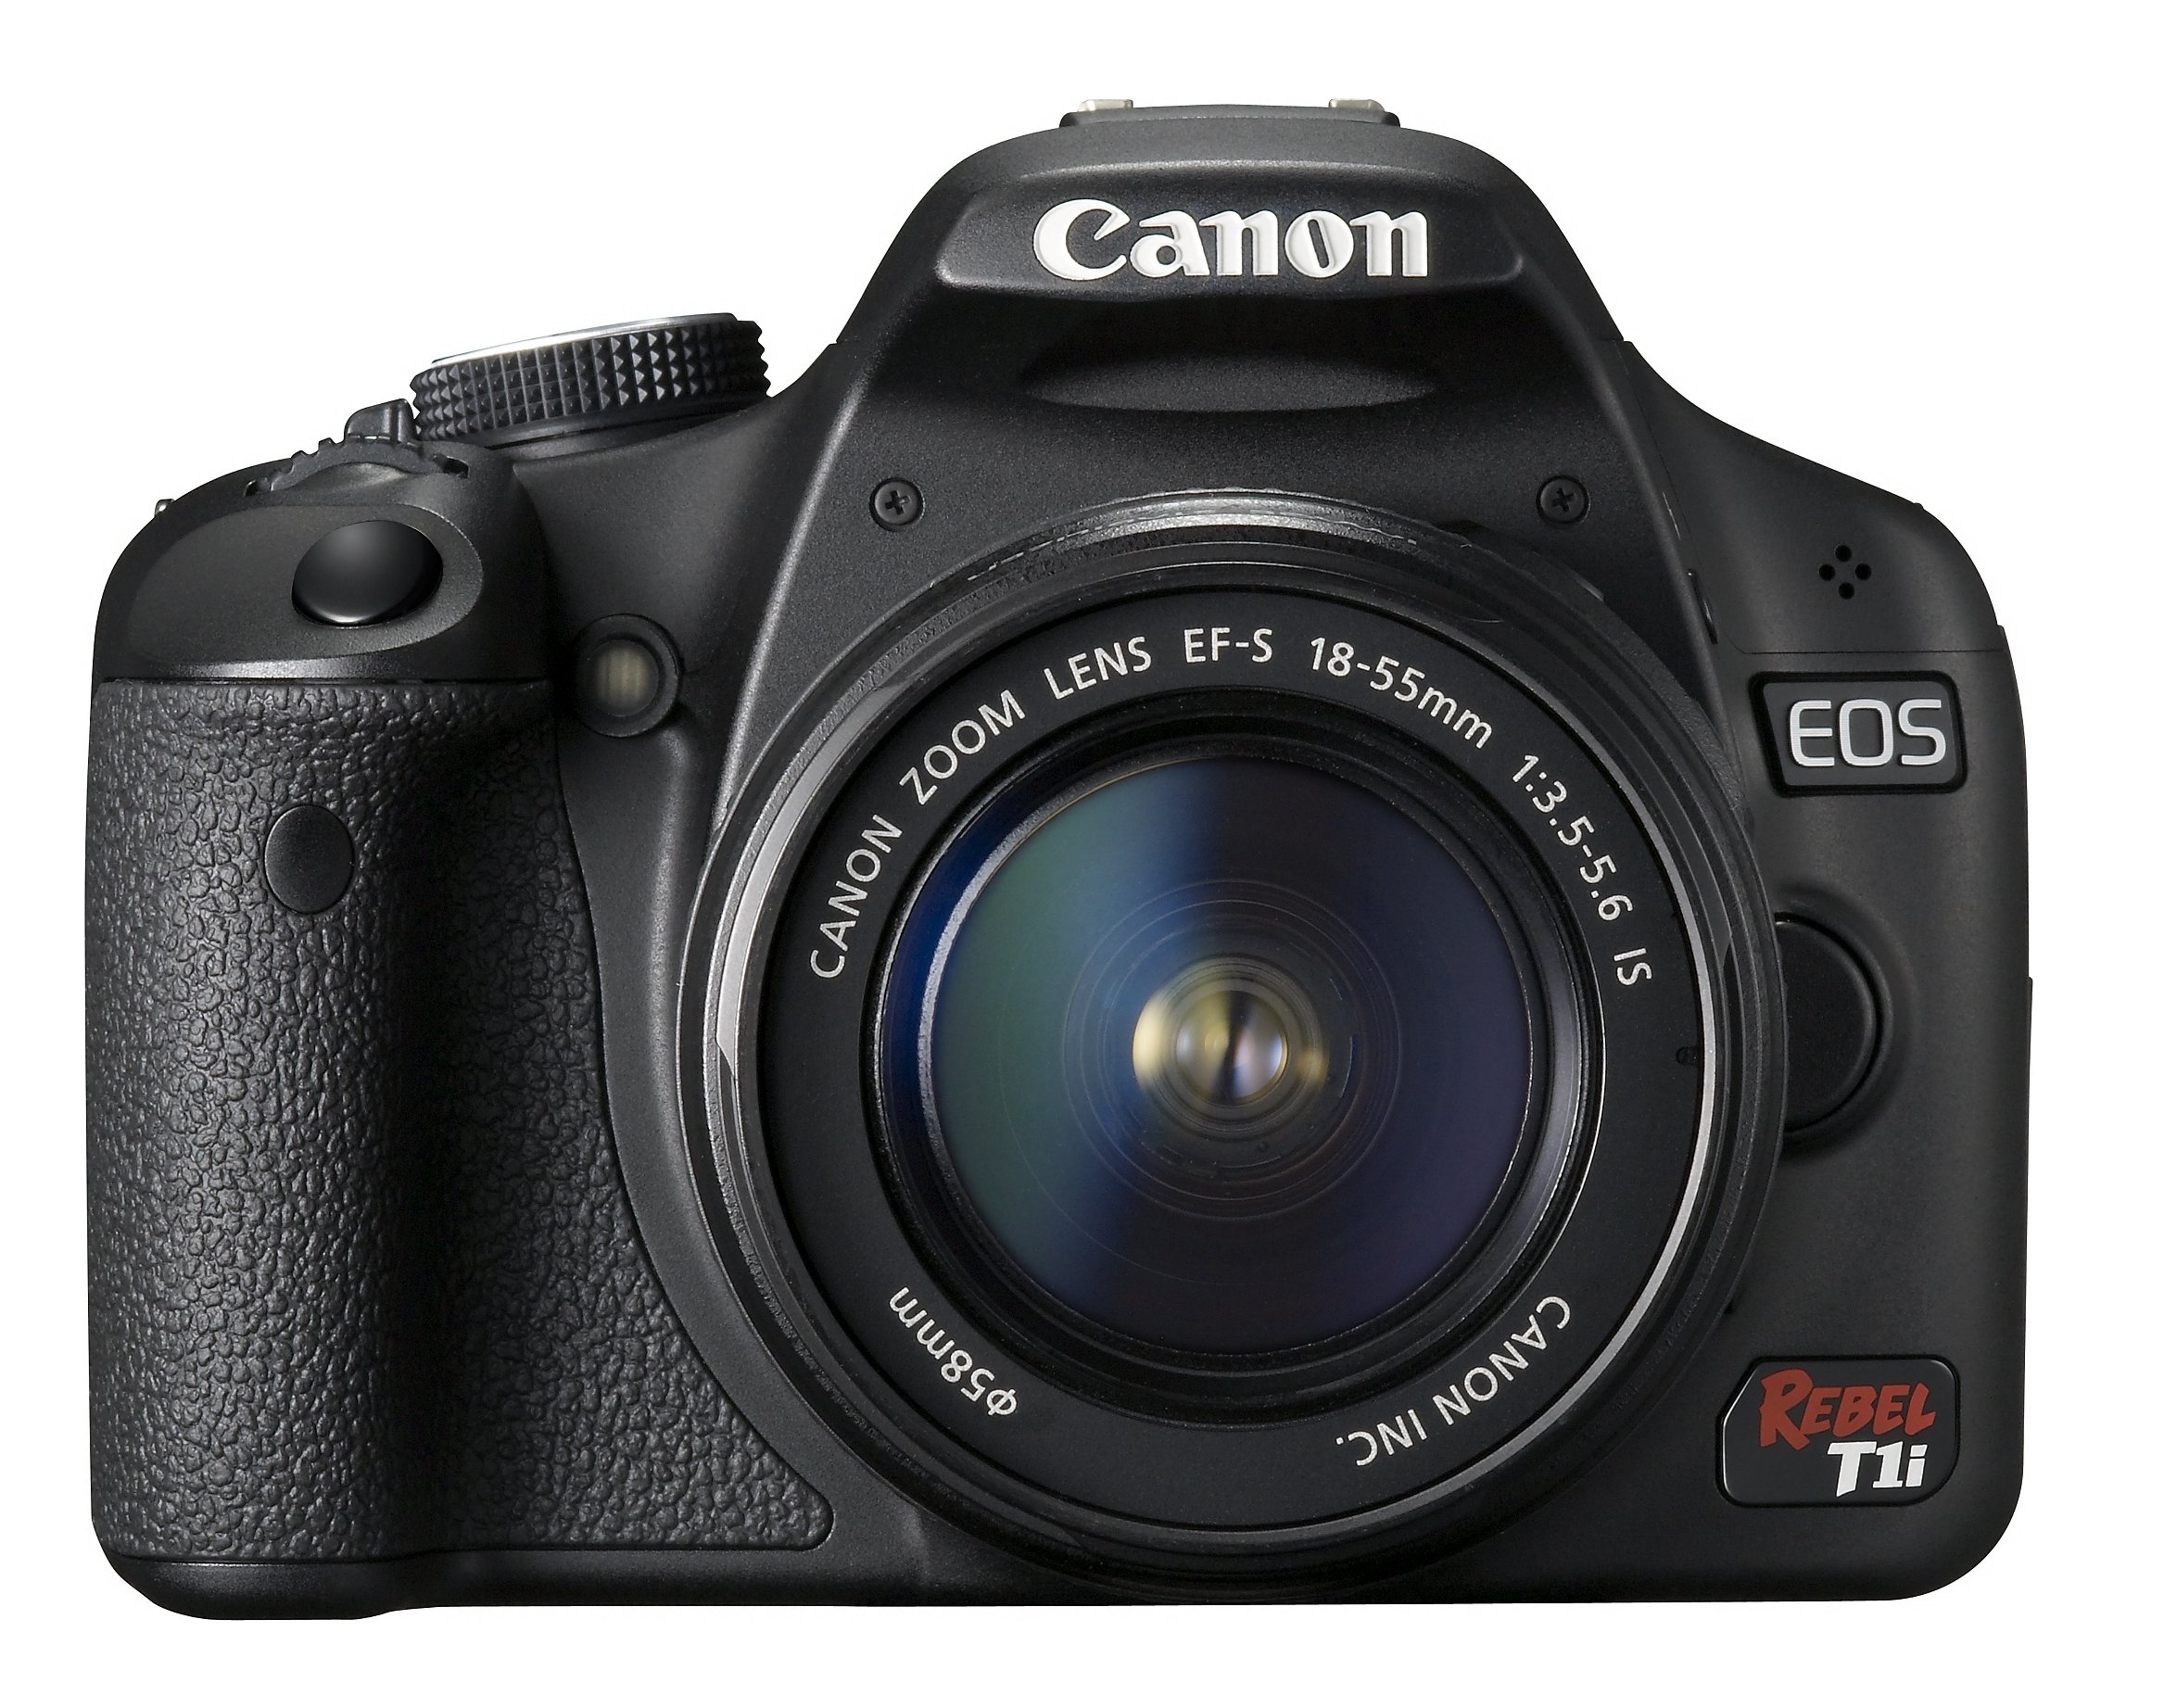 Canon EOS Rebel T1i 15.1 MP CMOS Digital SLR Camera with 3-Inch LCD and EF-S 18-55mm f/3.5-5.6 IS Lens